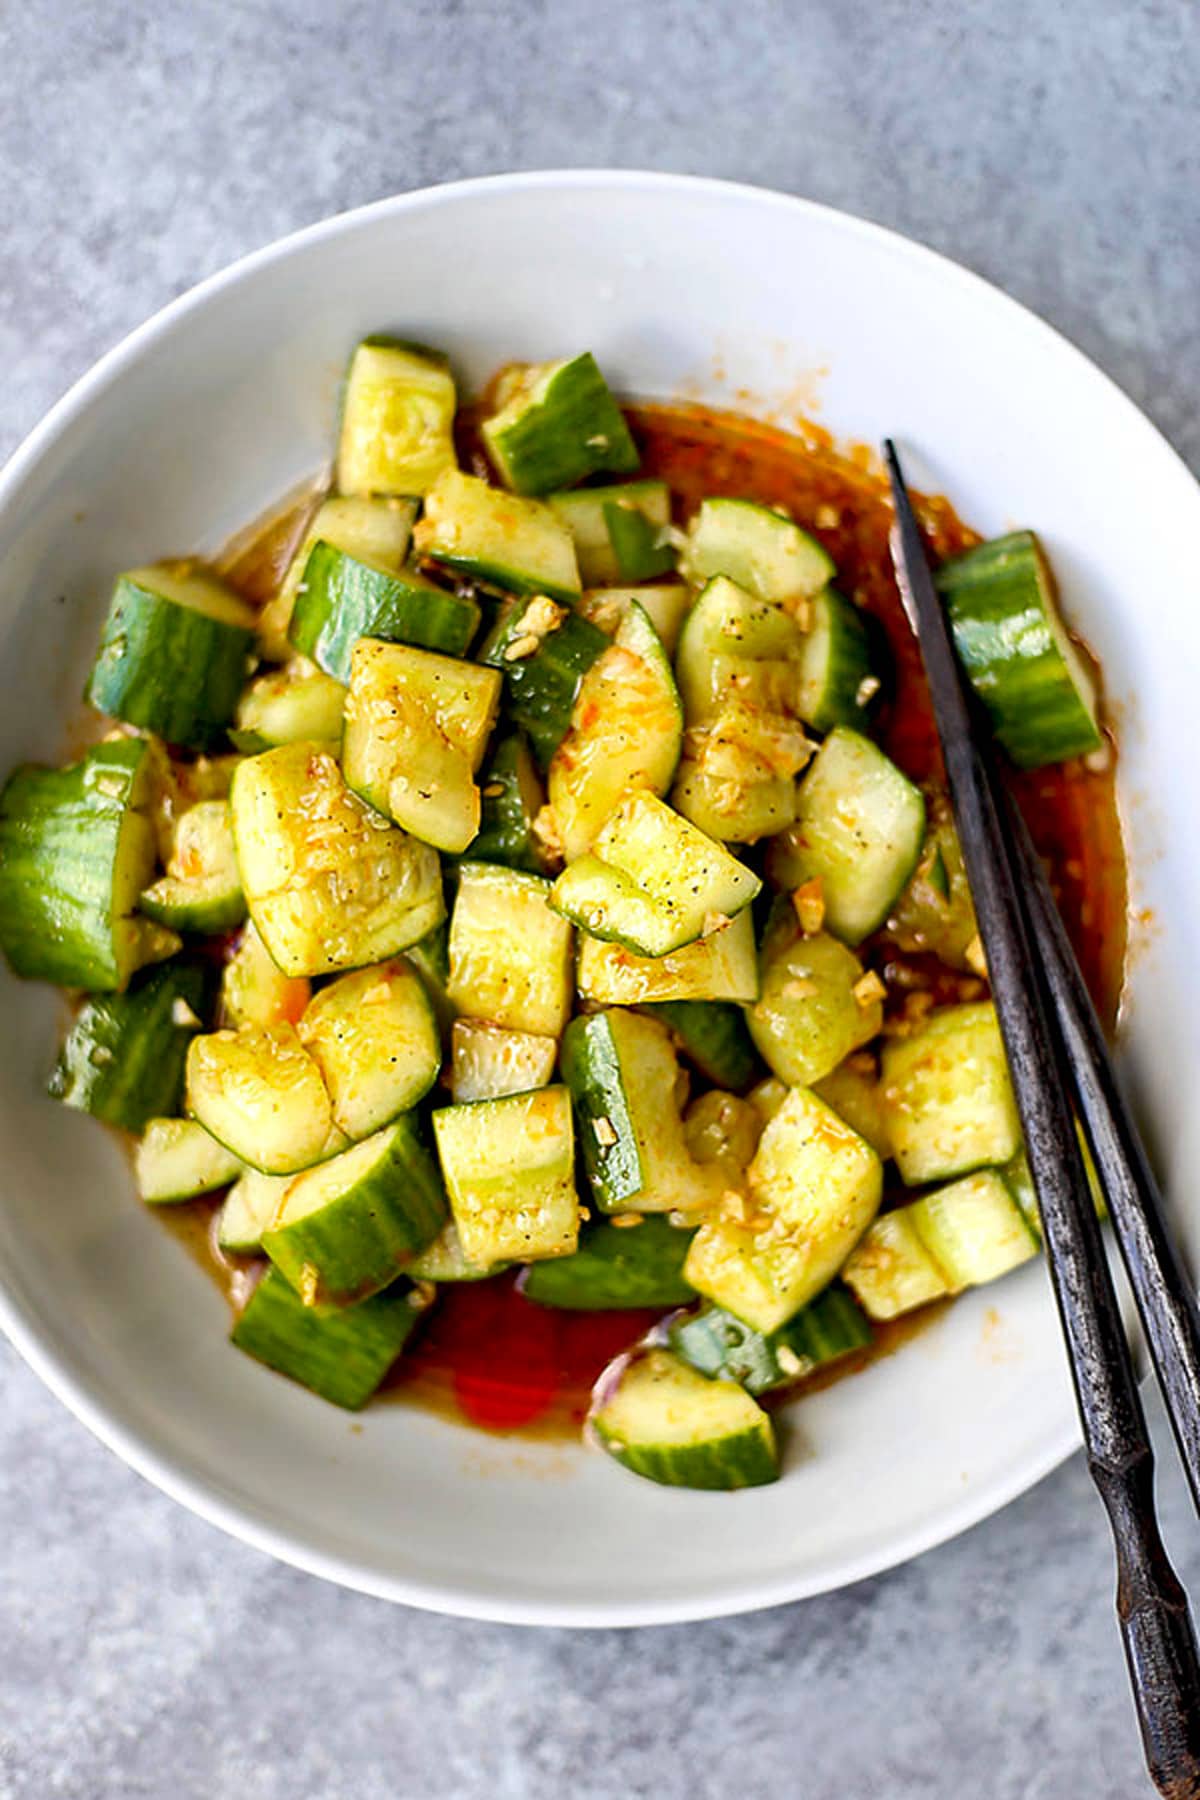 smacked cucumber with chili oil